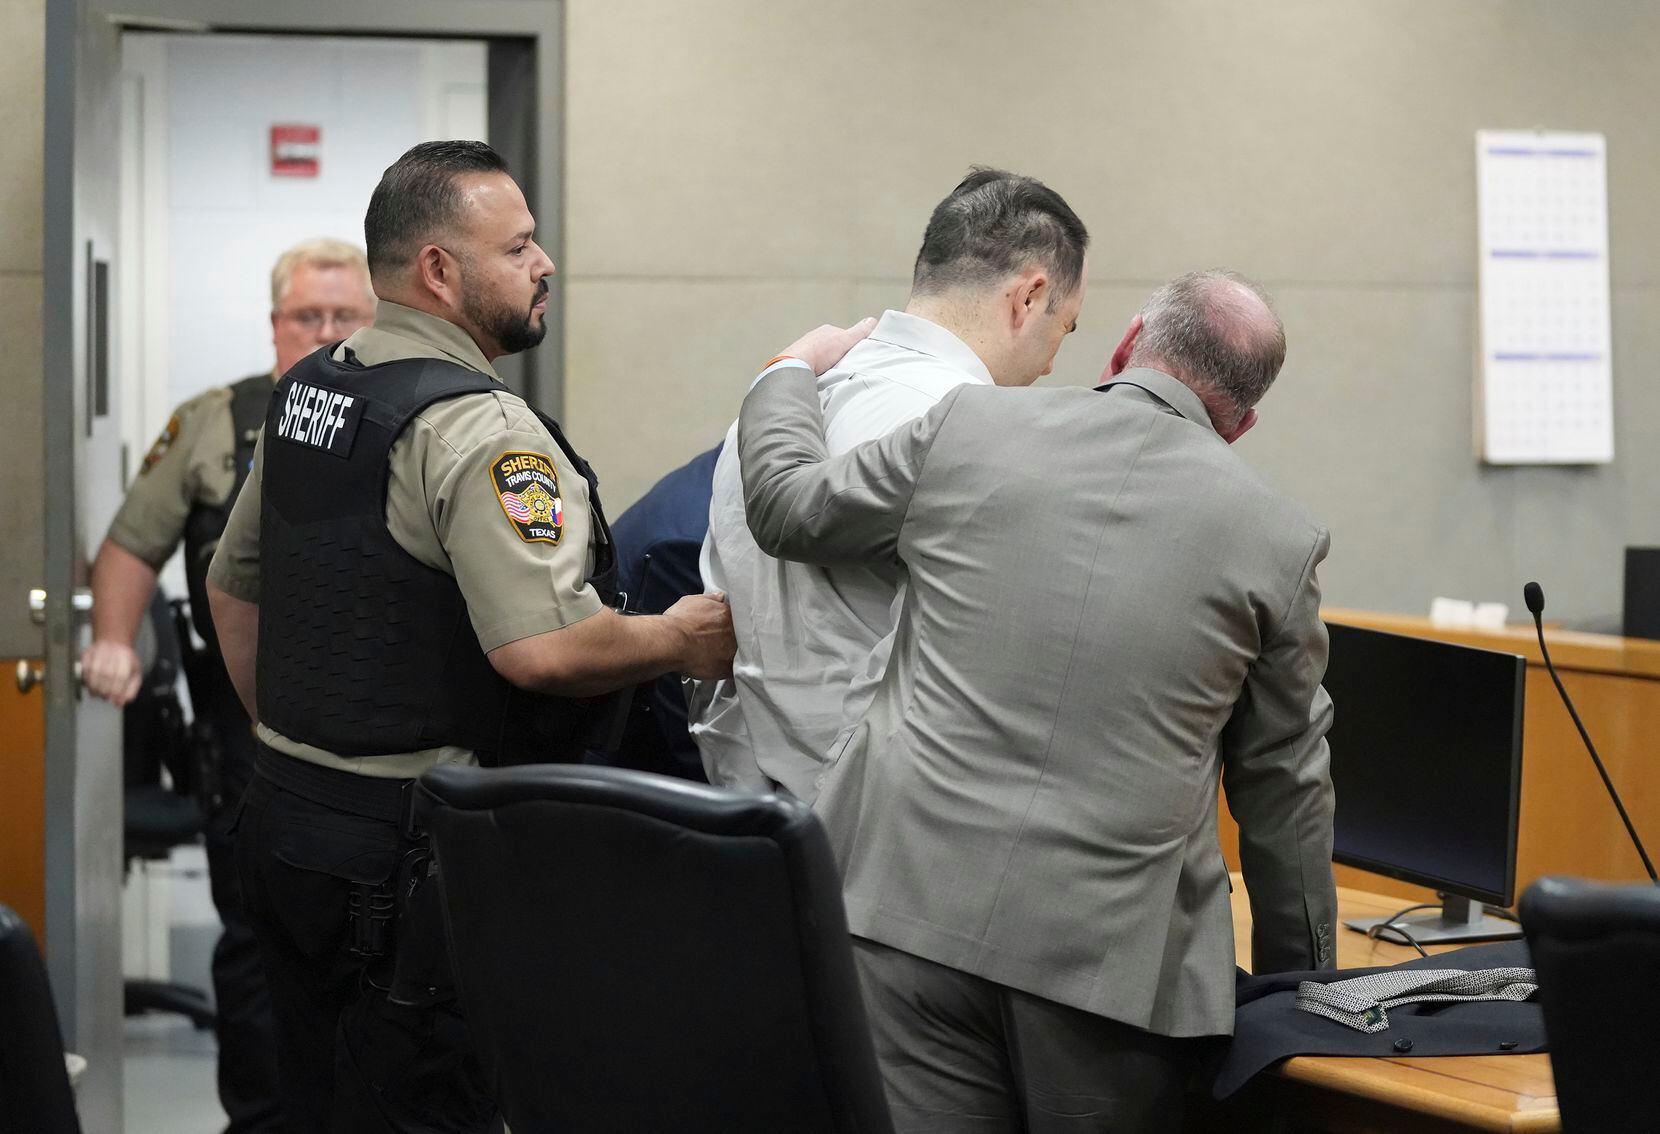 U.S. Army Sgt. Daniel Perry is comforted by his attorney Doug O'Connell after he was...